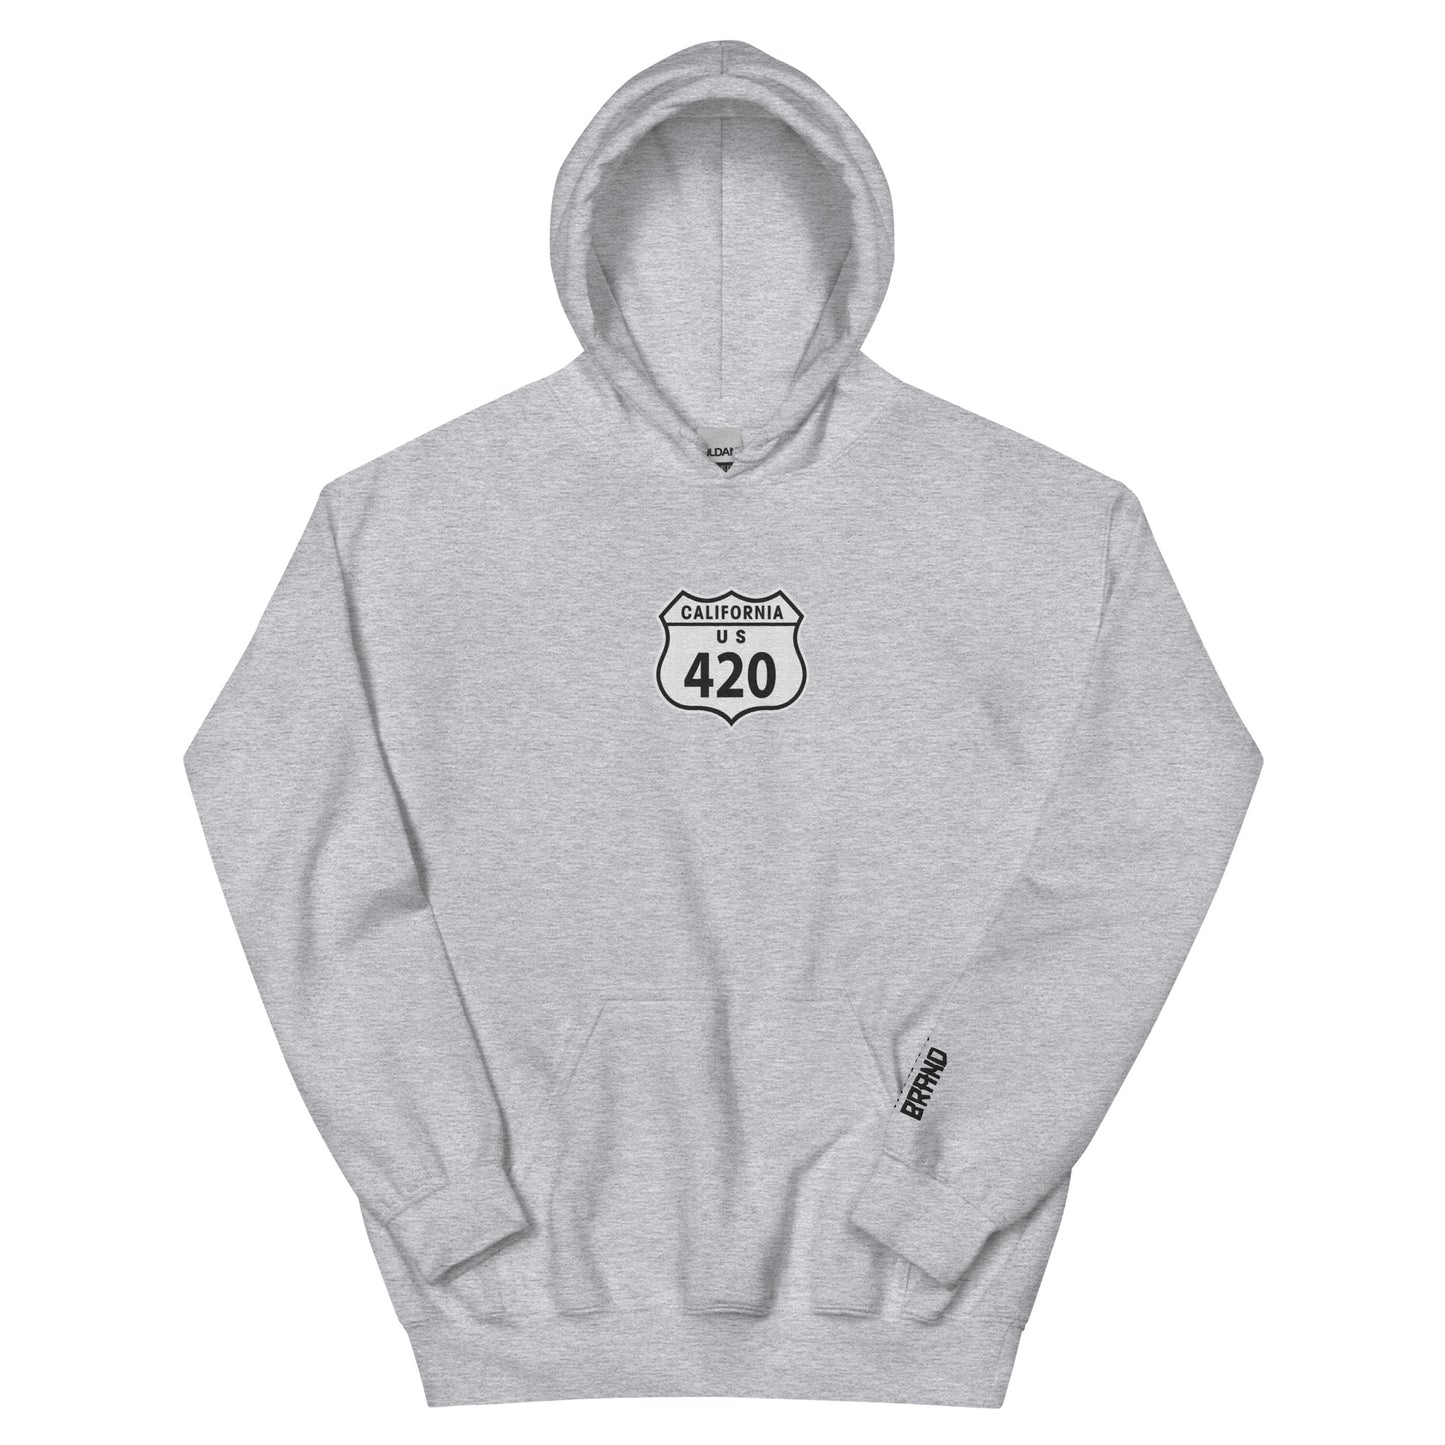 Kranik Brand Hoodie / 420 Collection / Embroidered / US 420